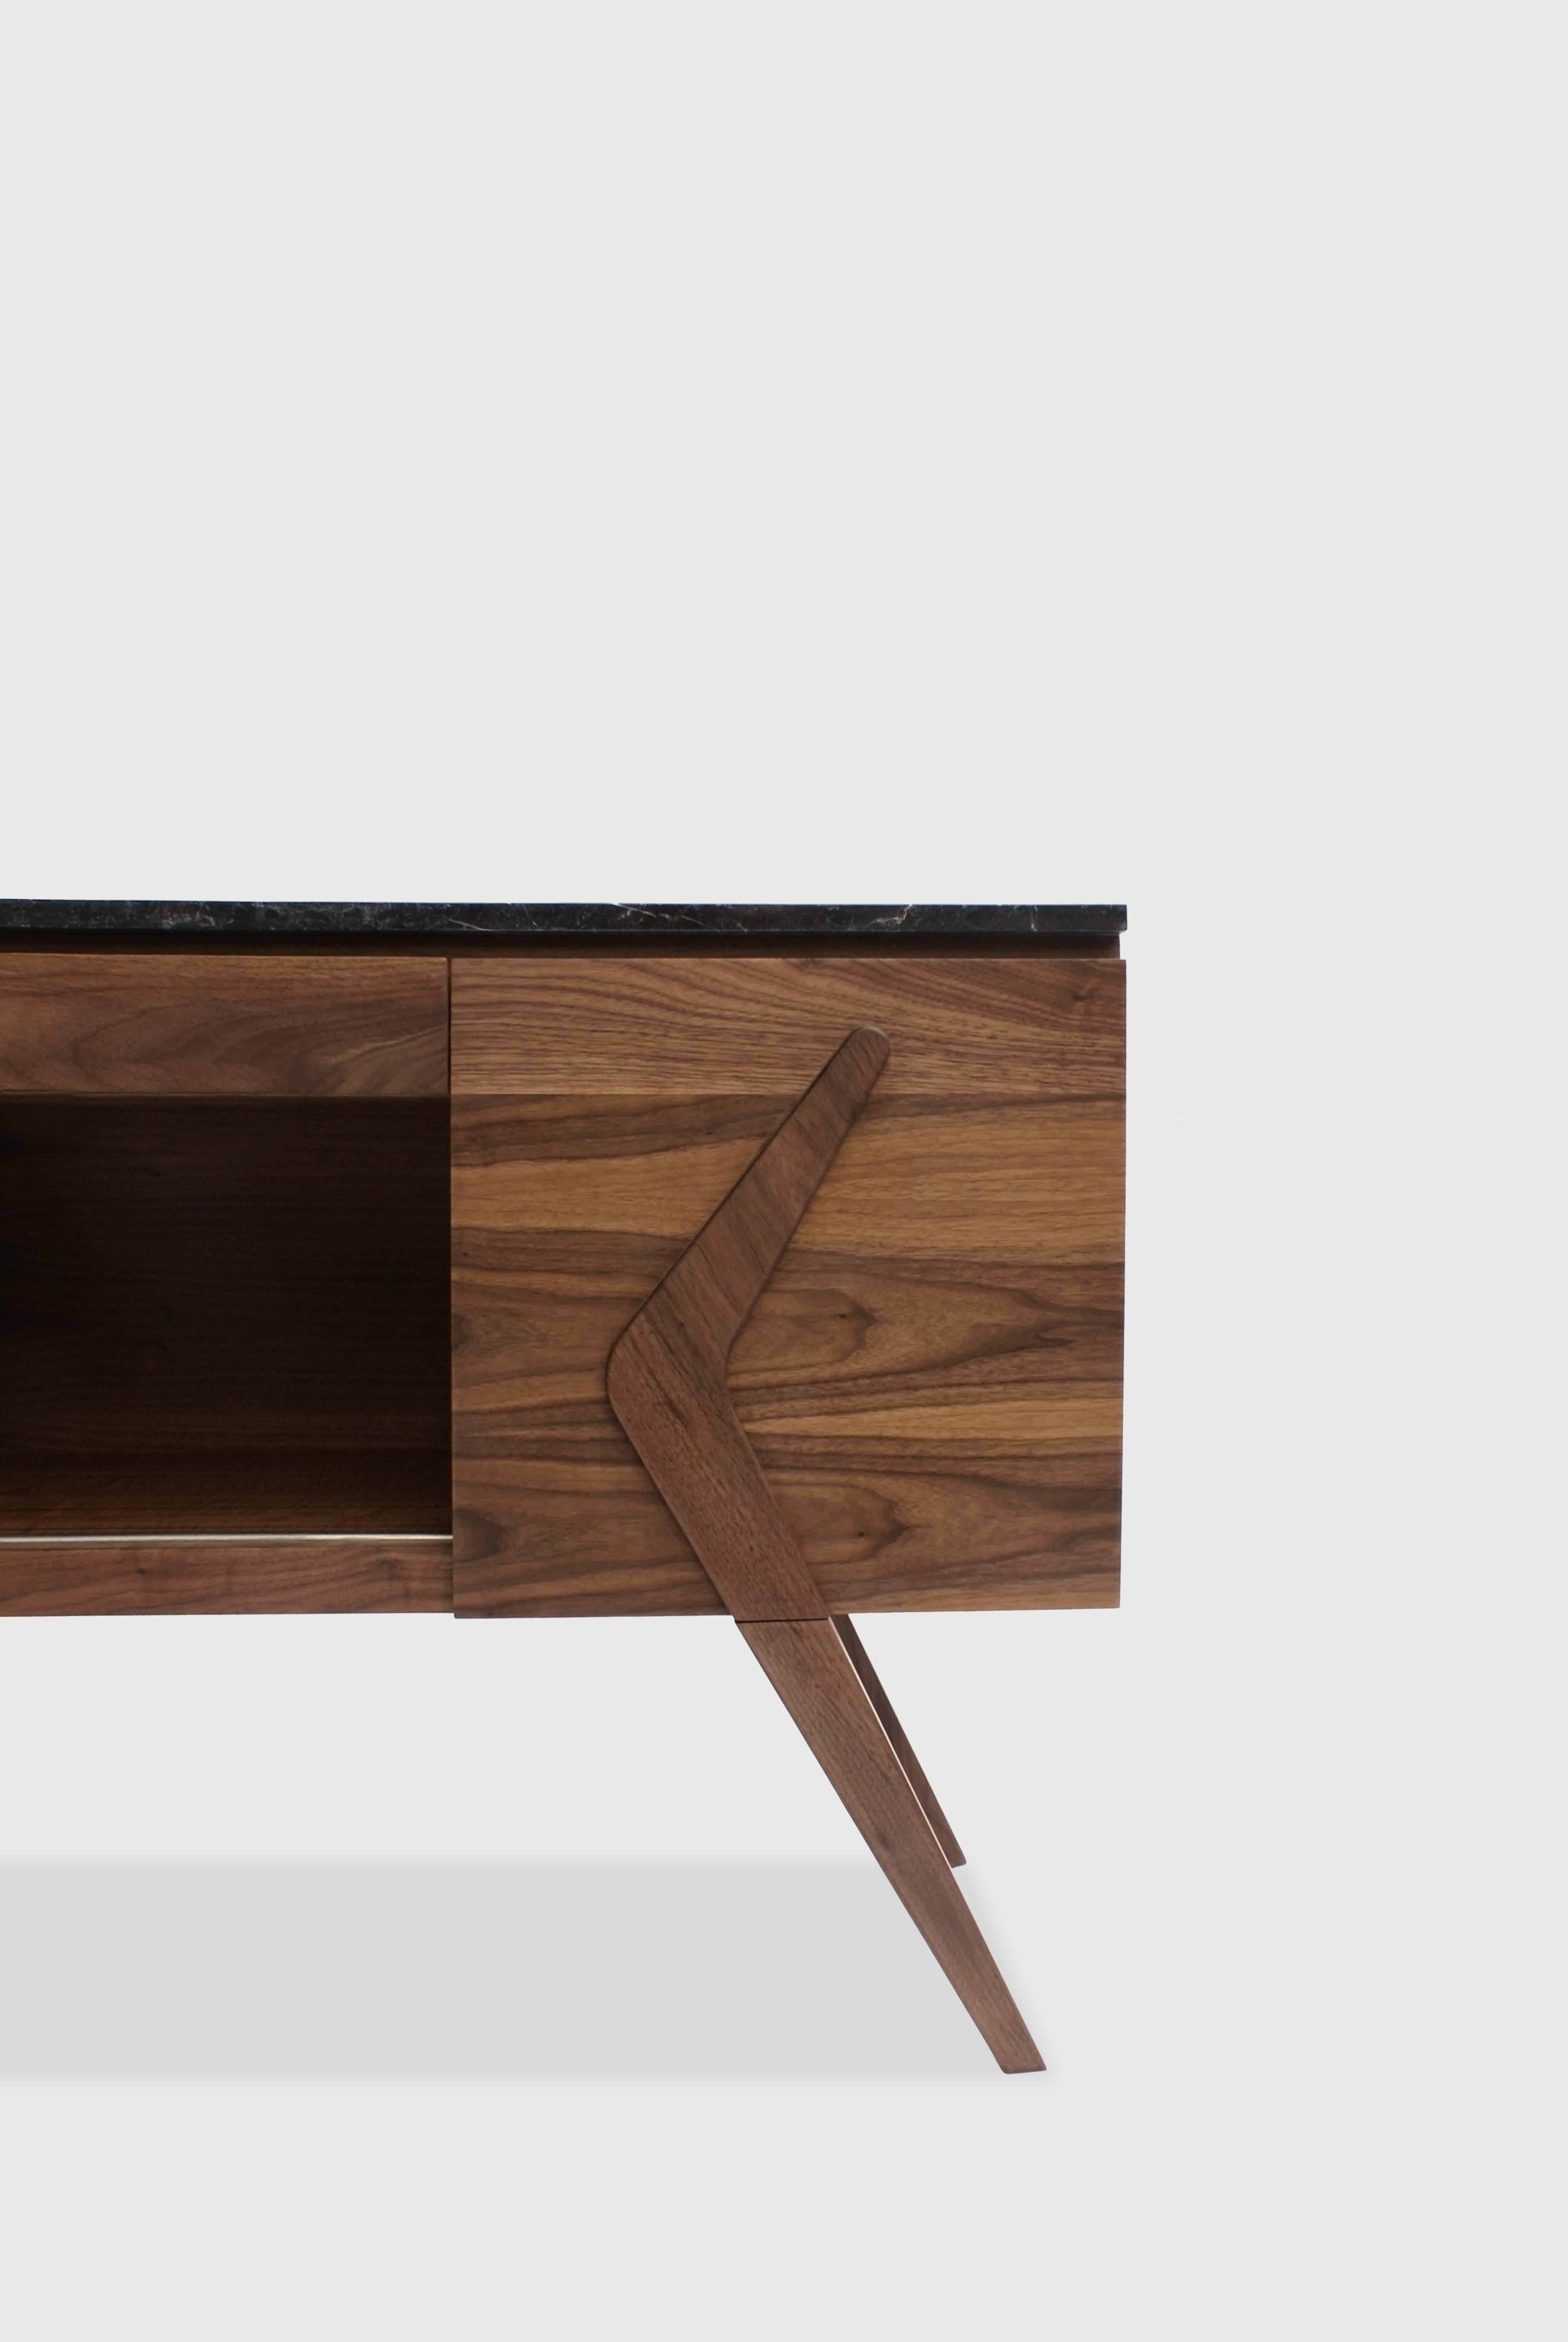 Boomerang is a walnut and marble credenza designed by Arturo Verástegui for BREUR ESTUDIO. This piece is part of Diseño y Ebanistería, BREUR ESTUDIO first ever collection, in which they collaborated with top architects to achieve exceptional